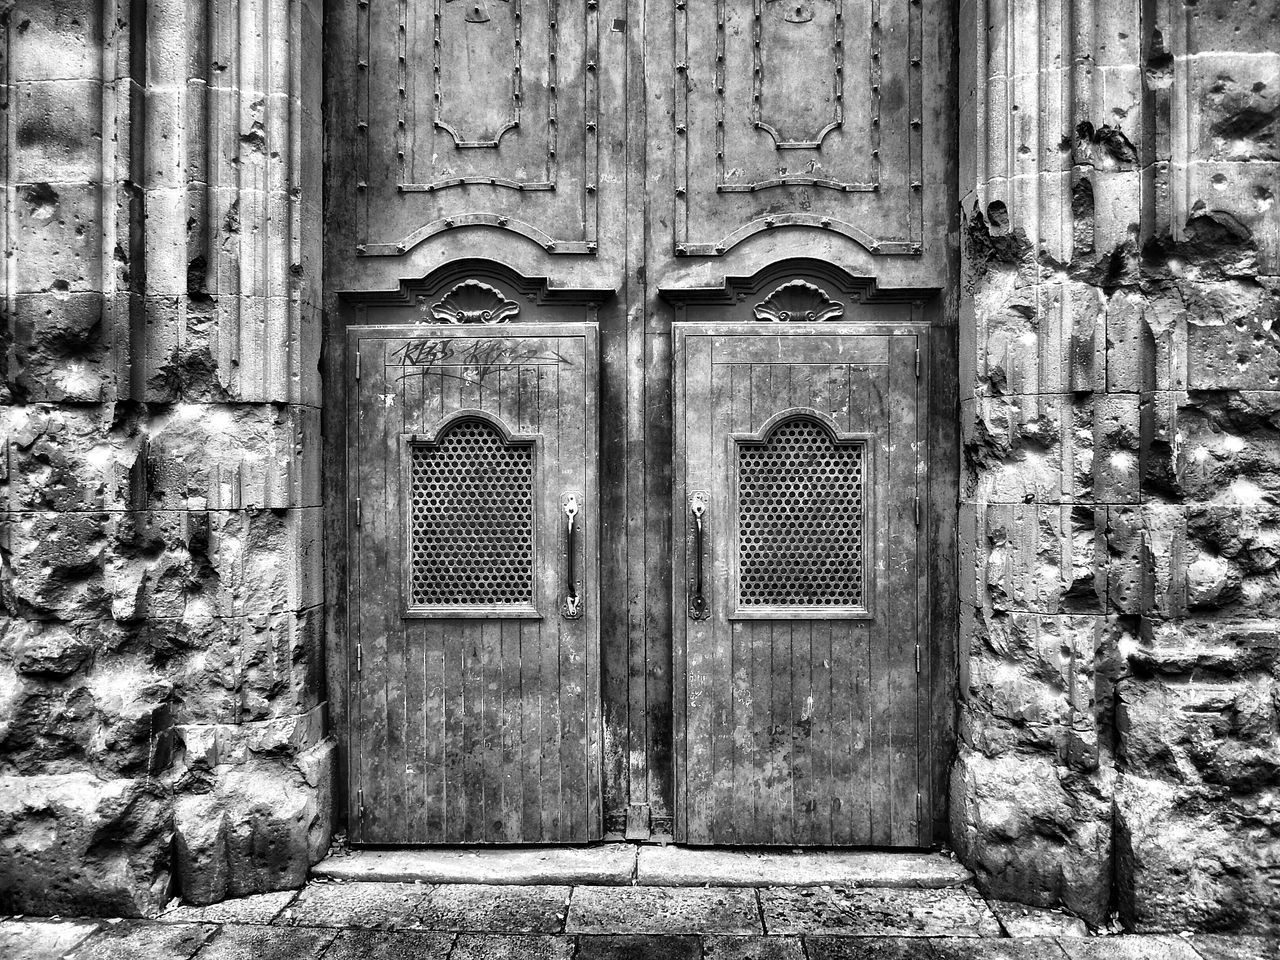 architecture, built structure, building exterior, door, closed, wood - material, entrance, old, window, house, protection, wooden, wall - building feature, safety, outdoors, day, weathered, no people, wood, security